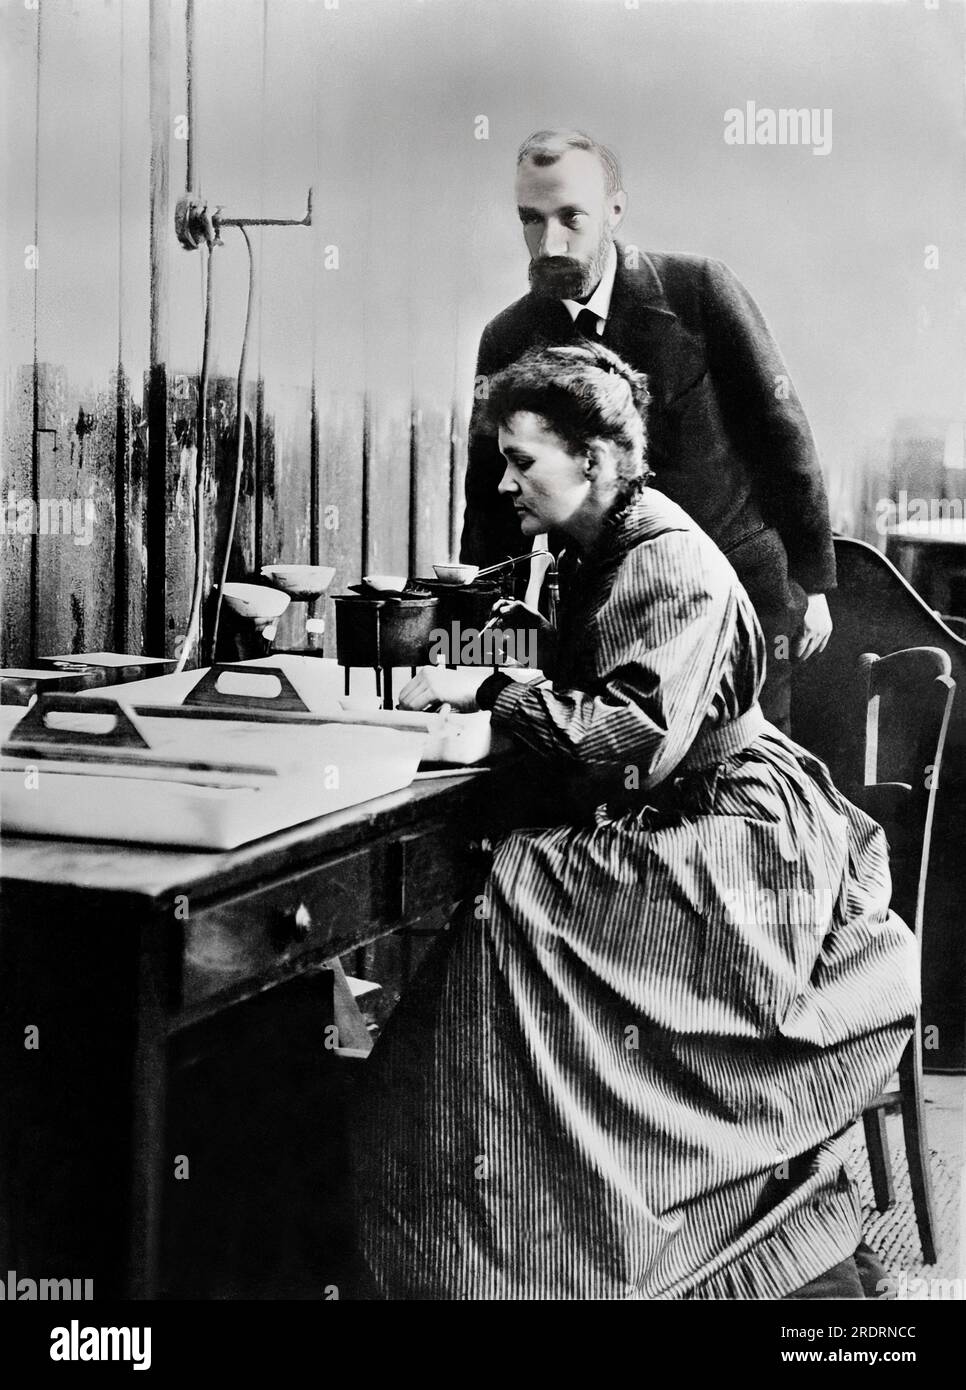 Pierre and Marie Curie at work in their laboratory. Stock Photo